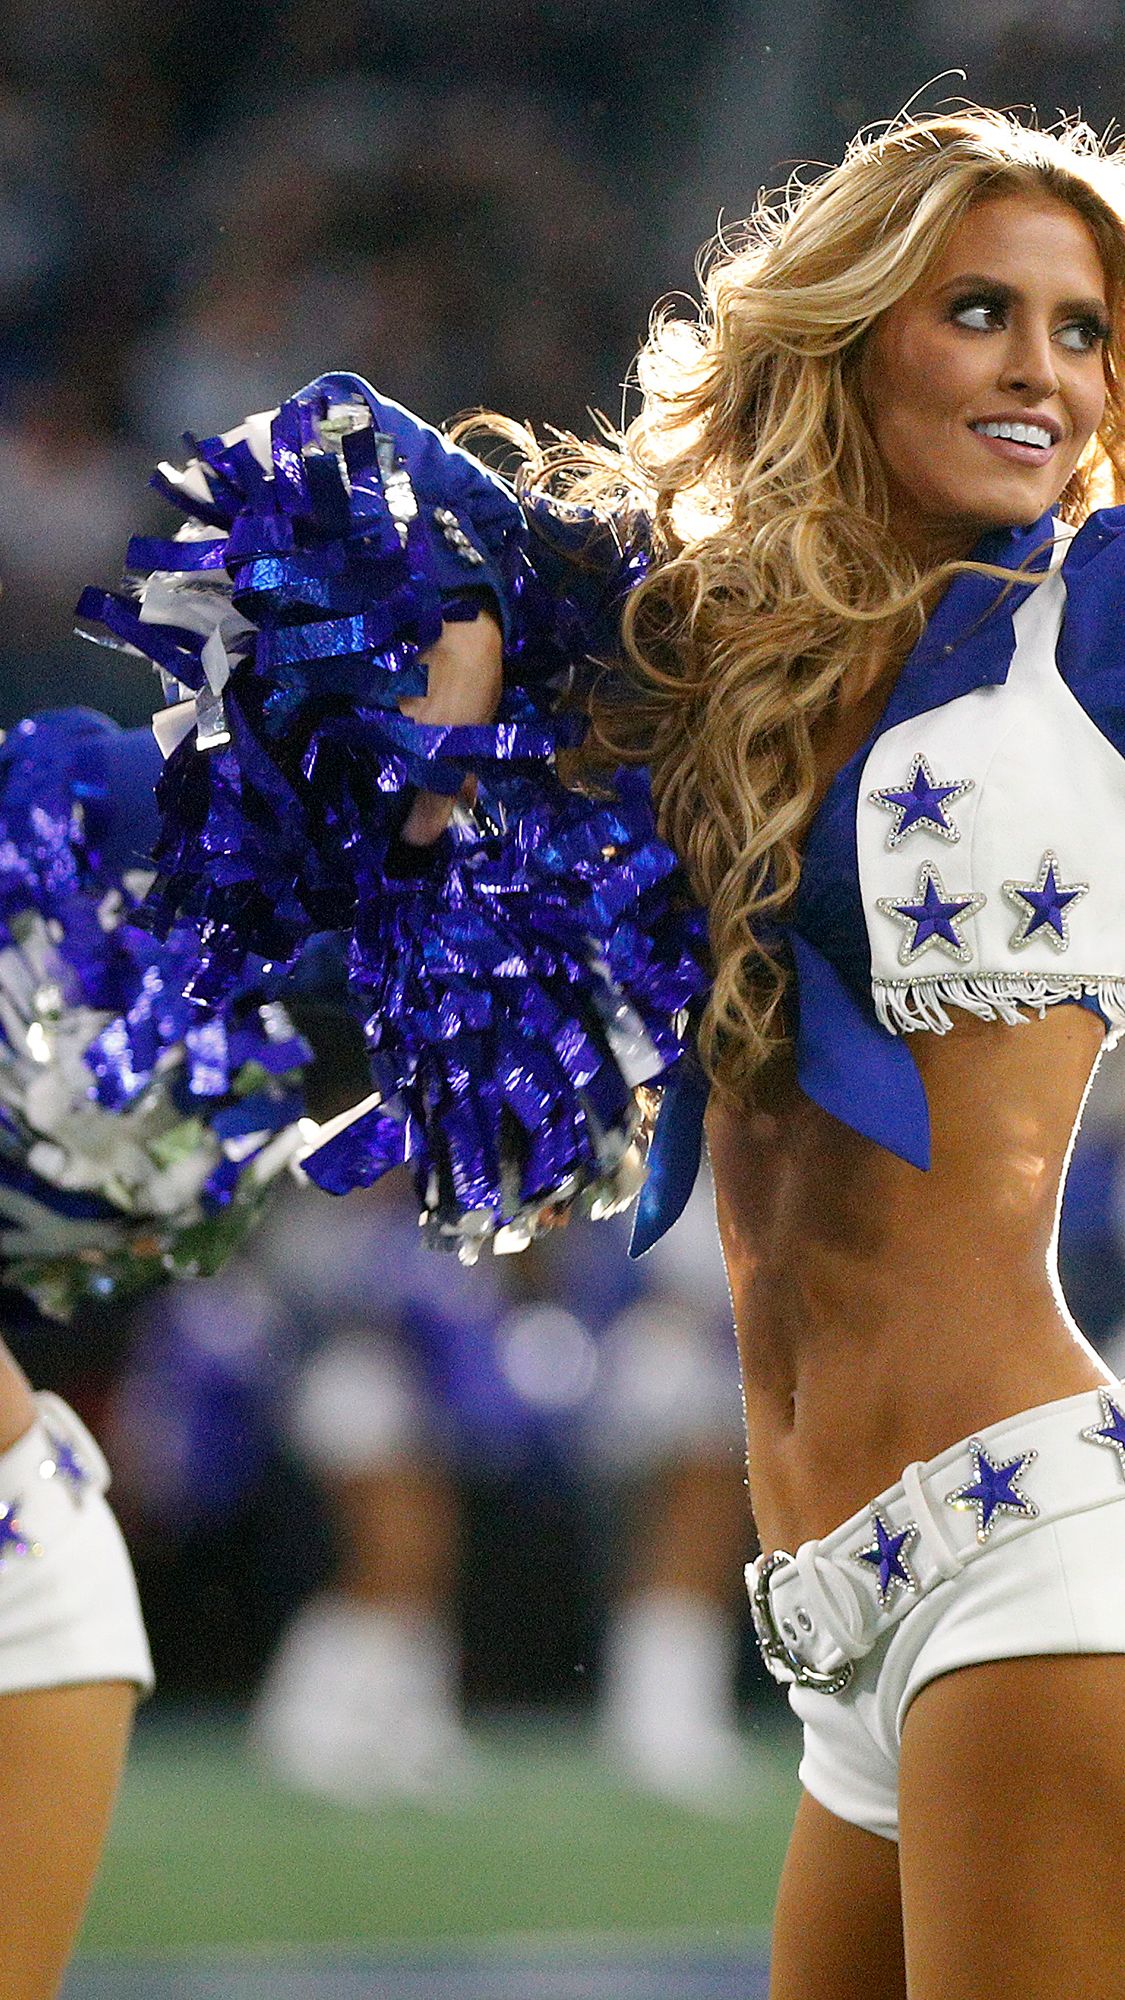 Sexy Female Cheerleaders - NFL cheer uniforms have been scrutinized since the 1970s, but critics might  be missing the point | CNN